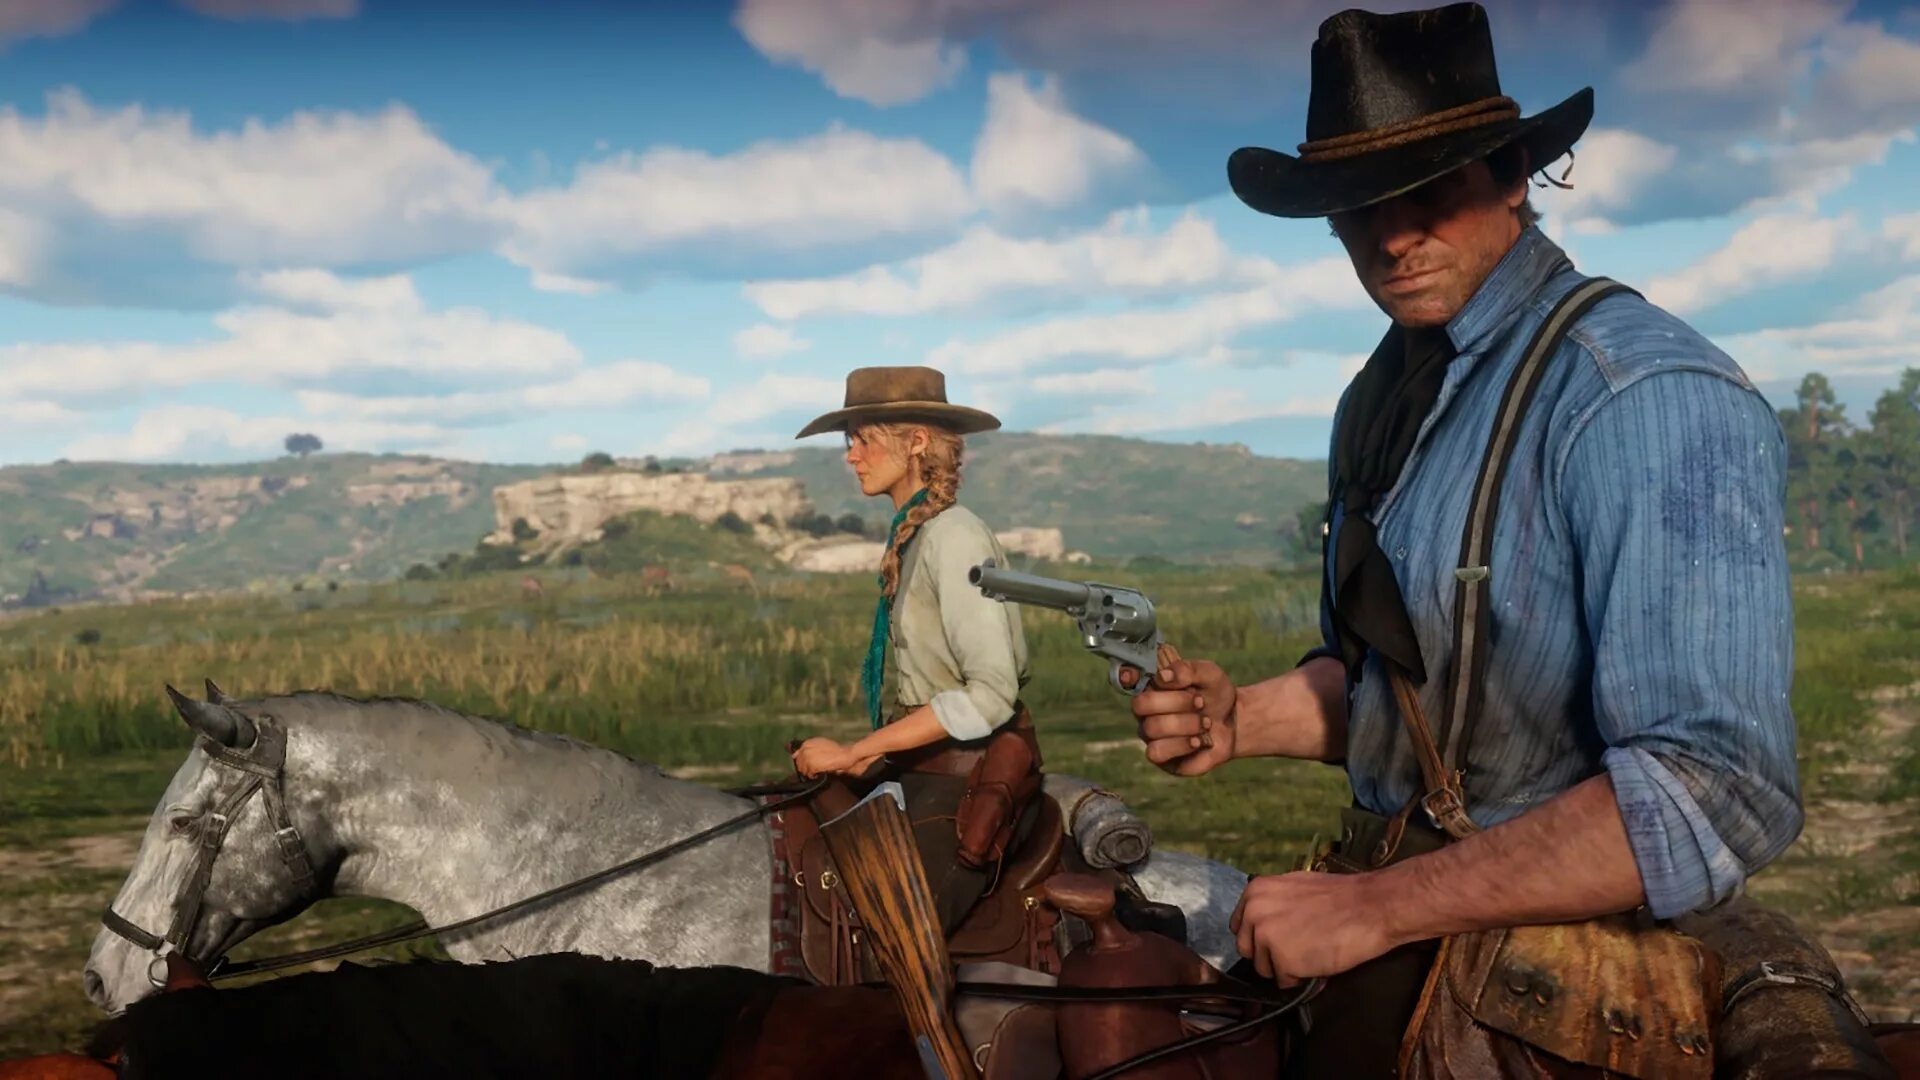 Red dead series. Игра Red Dead Redemption 2. Дикий Запад Red Dead Redemption. Дикий Запад Red Dead Redemption 1.